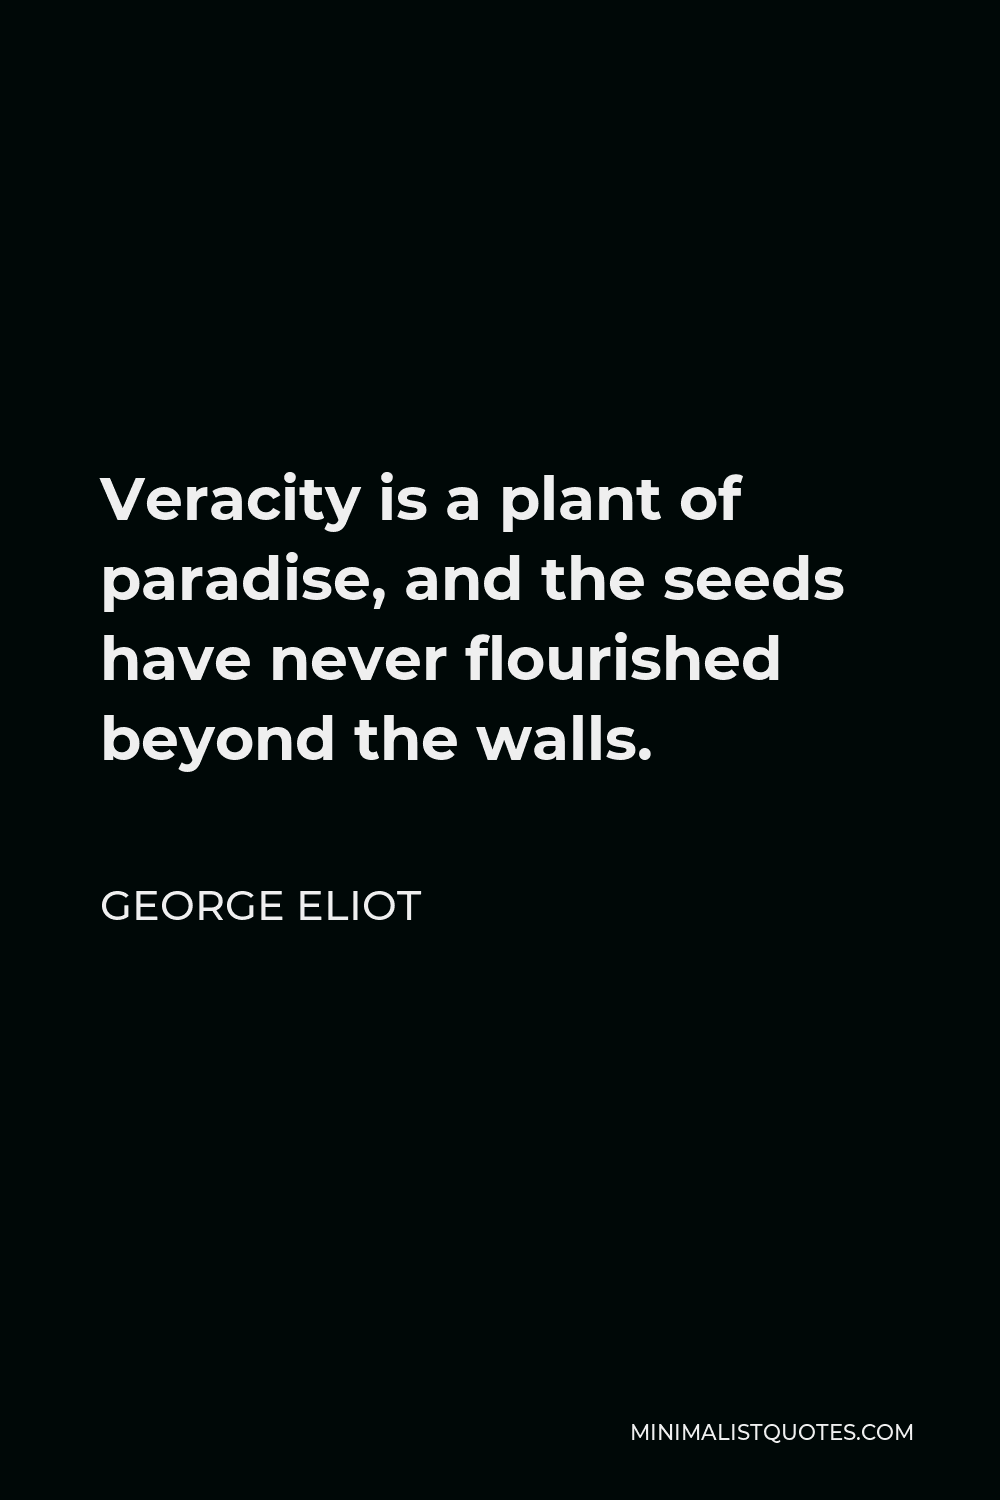 George Eliot Quote - Veracity is a plant of paradise, and the seeds have never flourished beyond the walls.